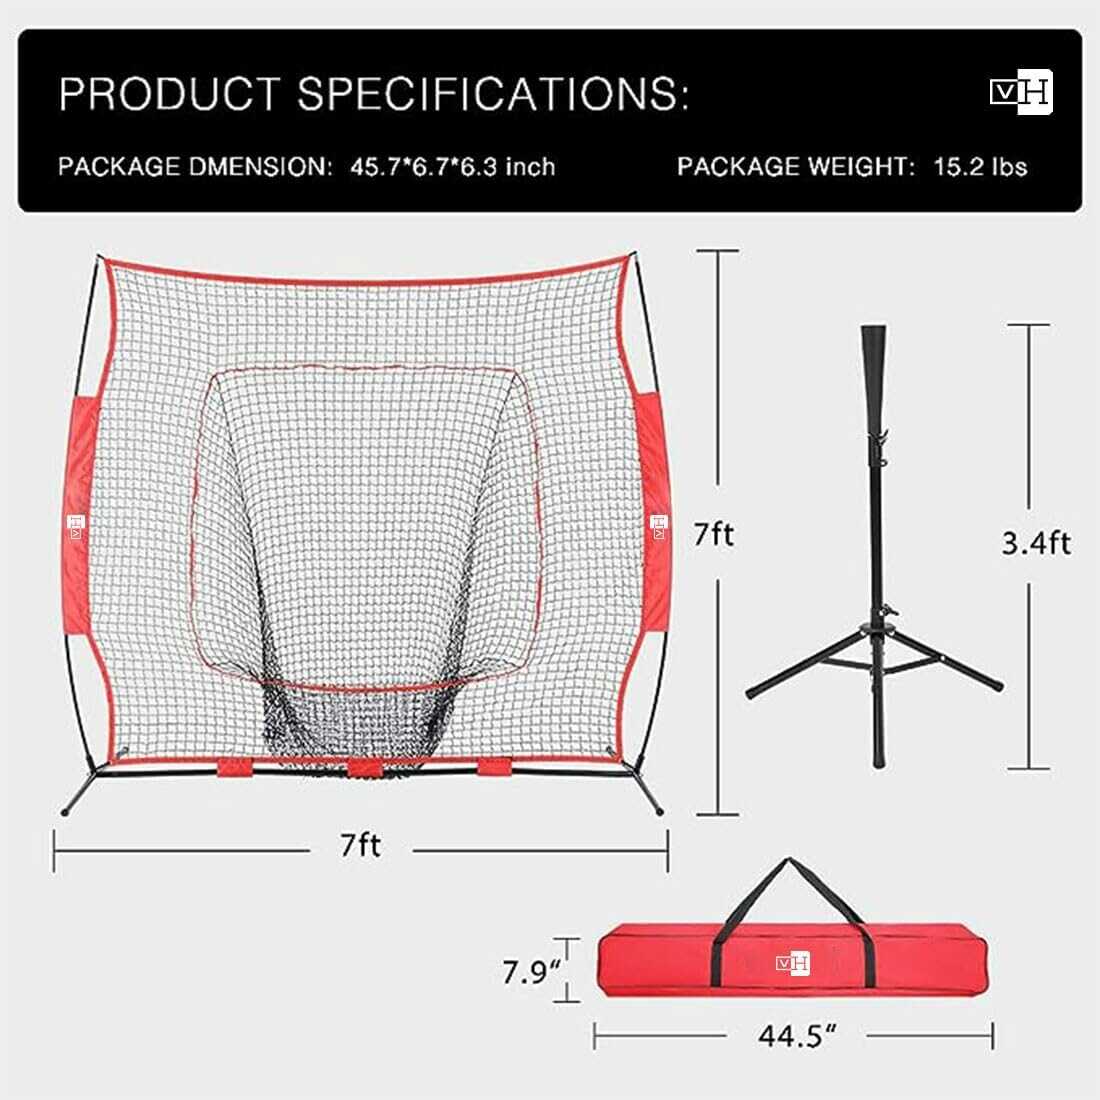 VIVOHOME Baseball Practice Net Set with Strike Zone Target and Carry Bag